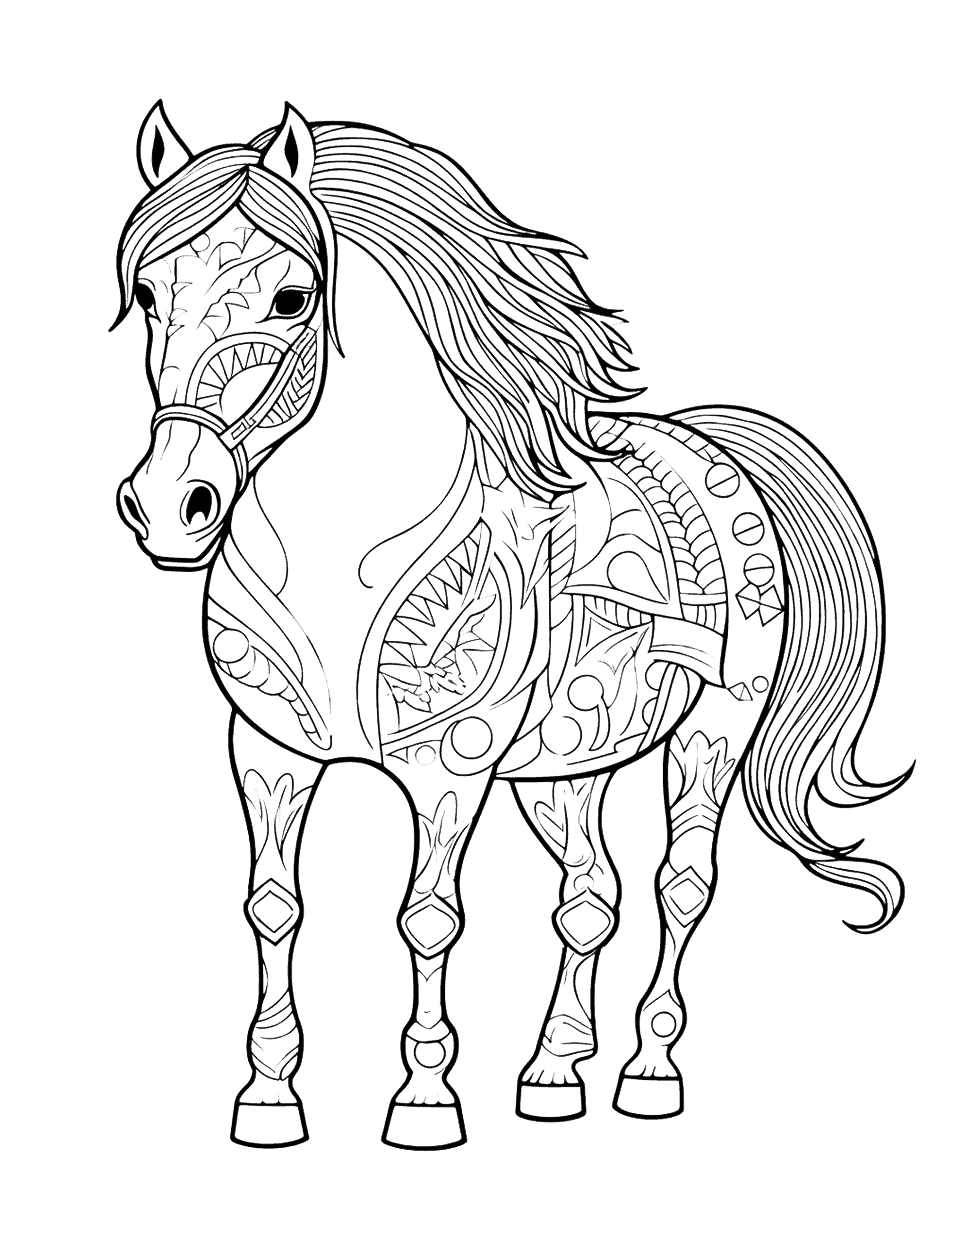 Horse Mandala for Concentration Coloring Page - A detailed horse-themed mandala design to help improve concentration.